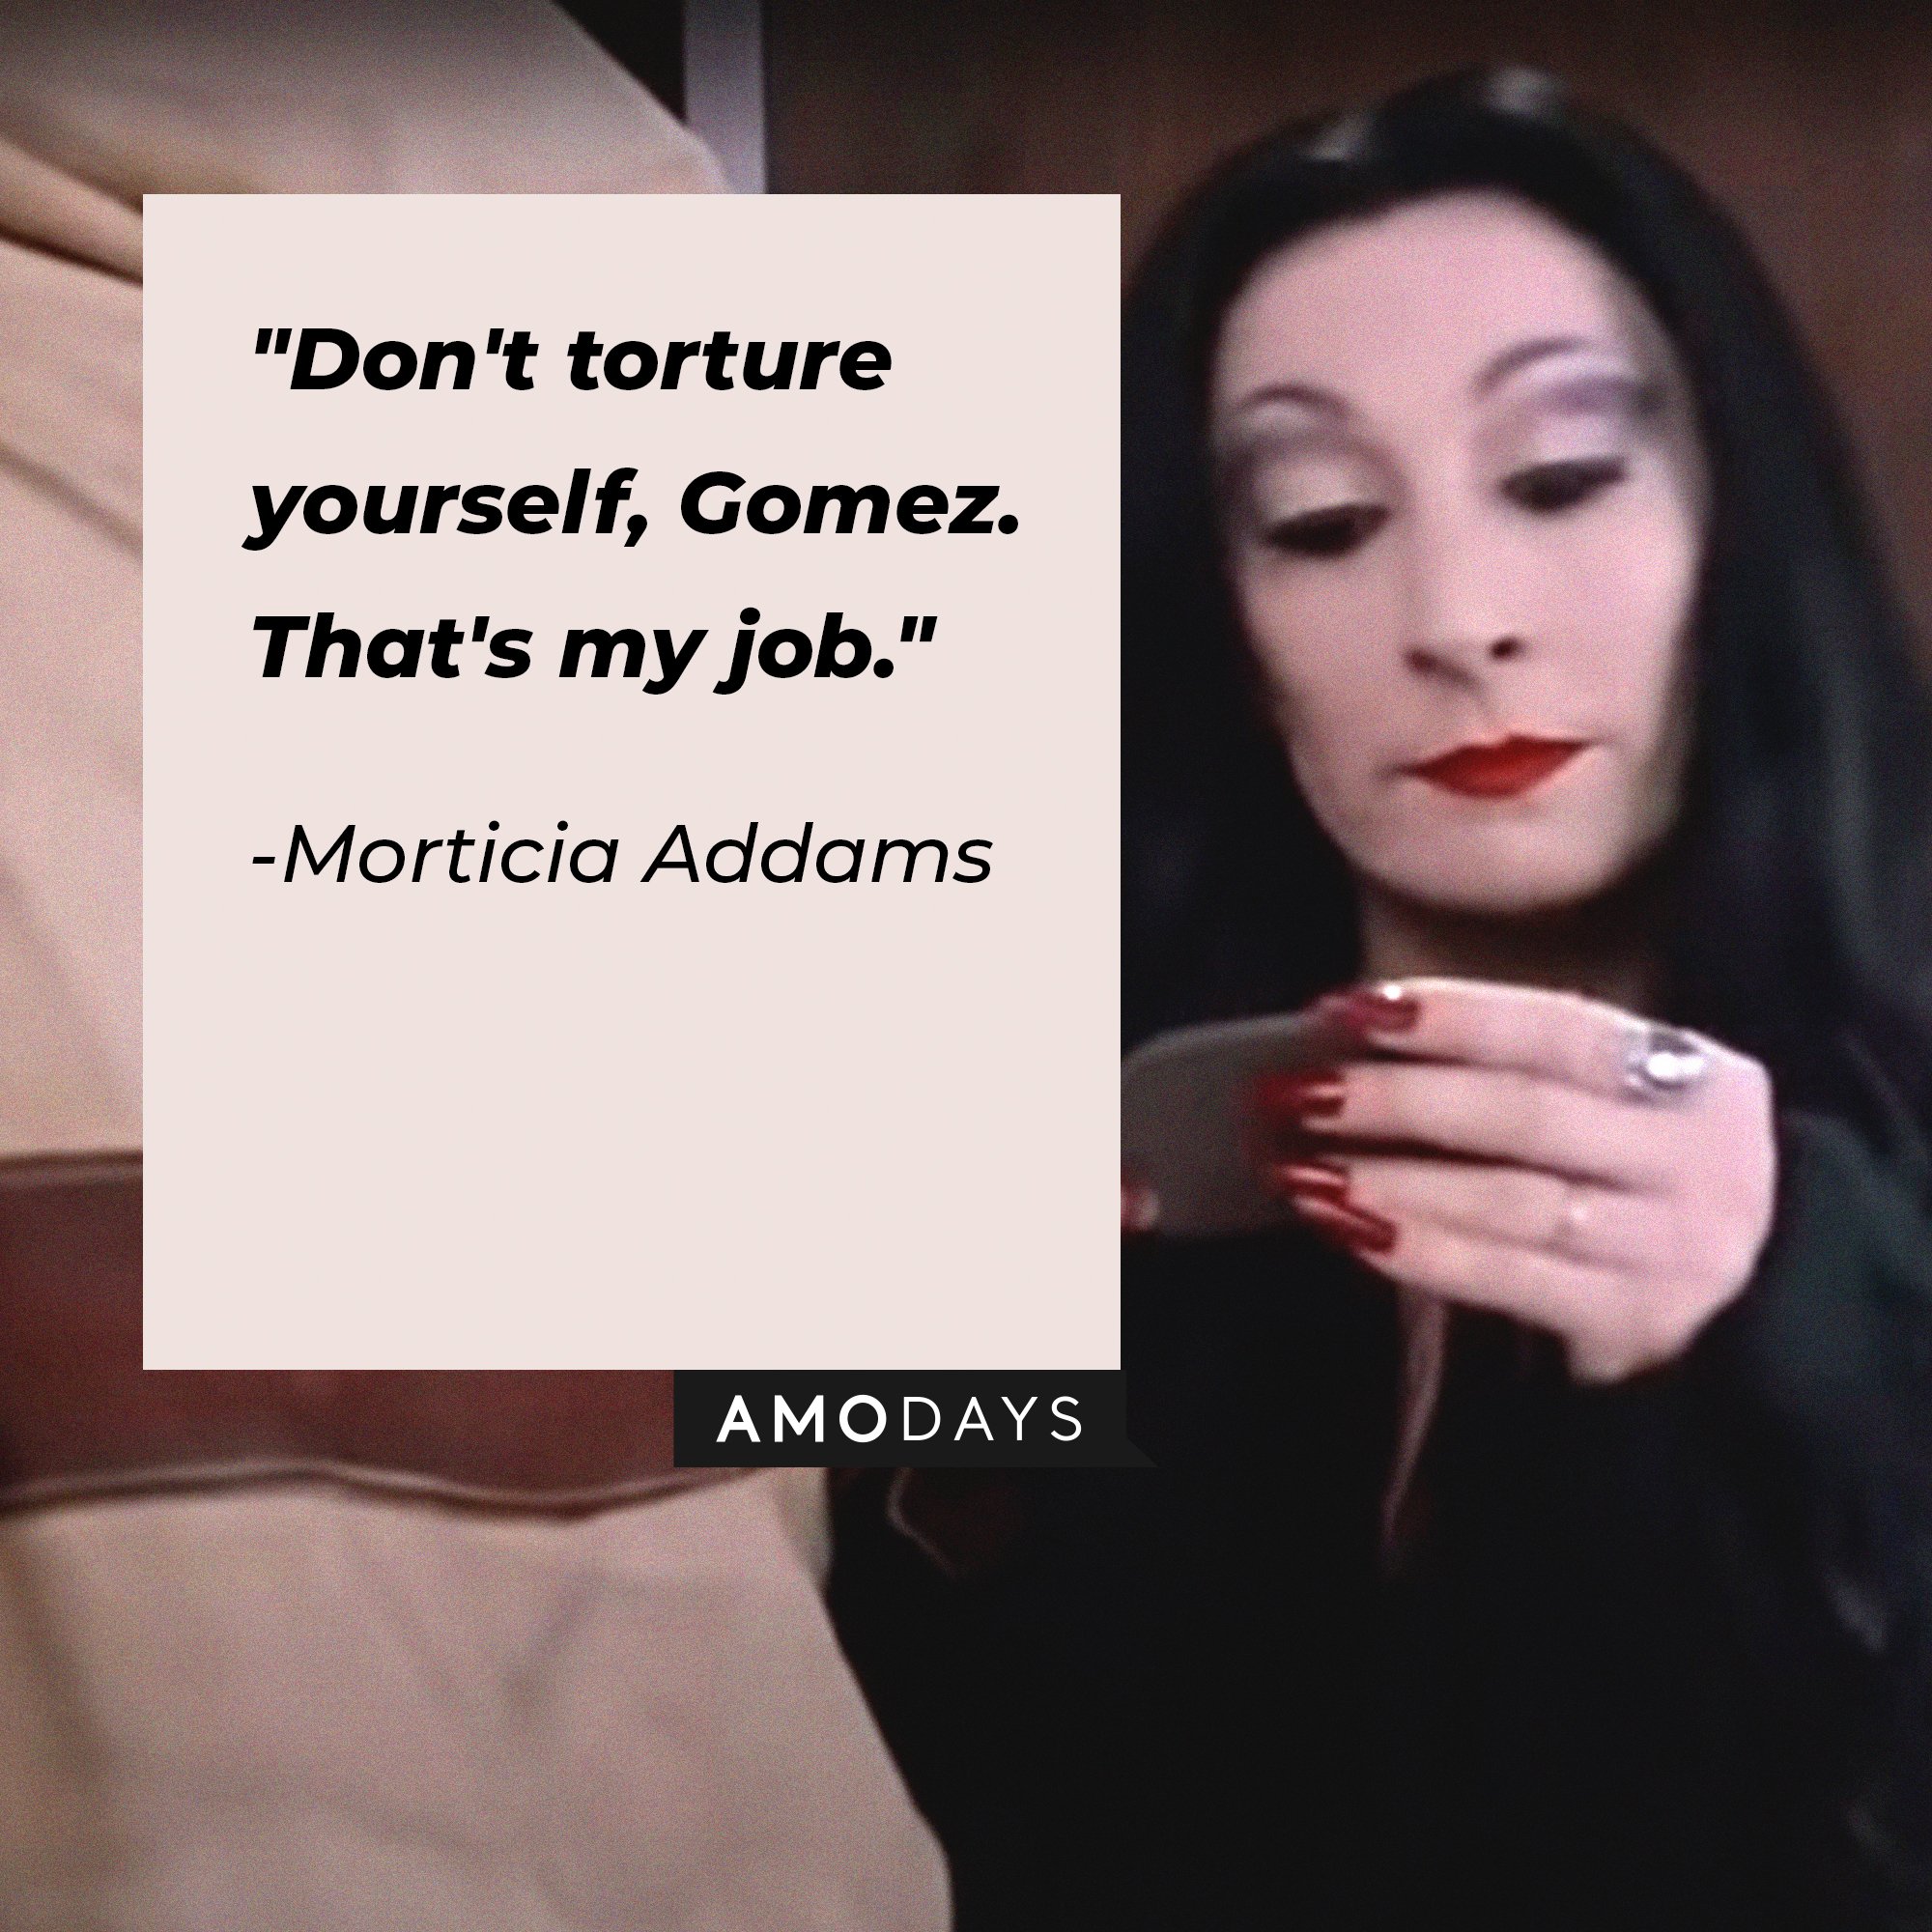 Morticia Addams’ quote: "Don't torture yourself, Gomez. That's my job." | Image: AmoDays